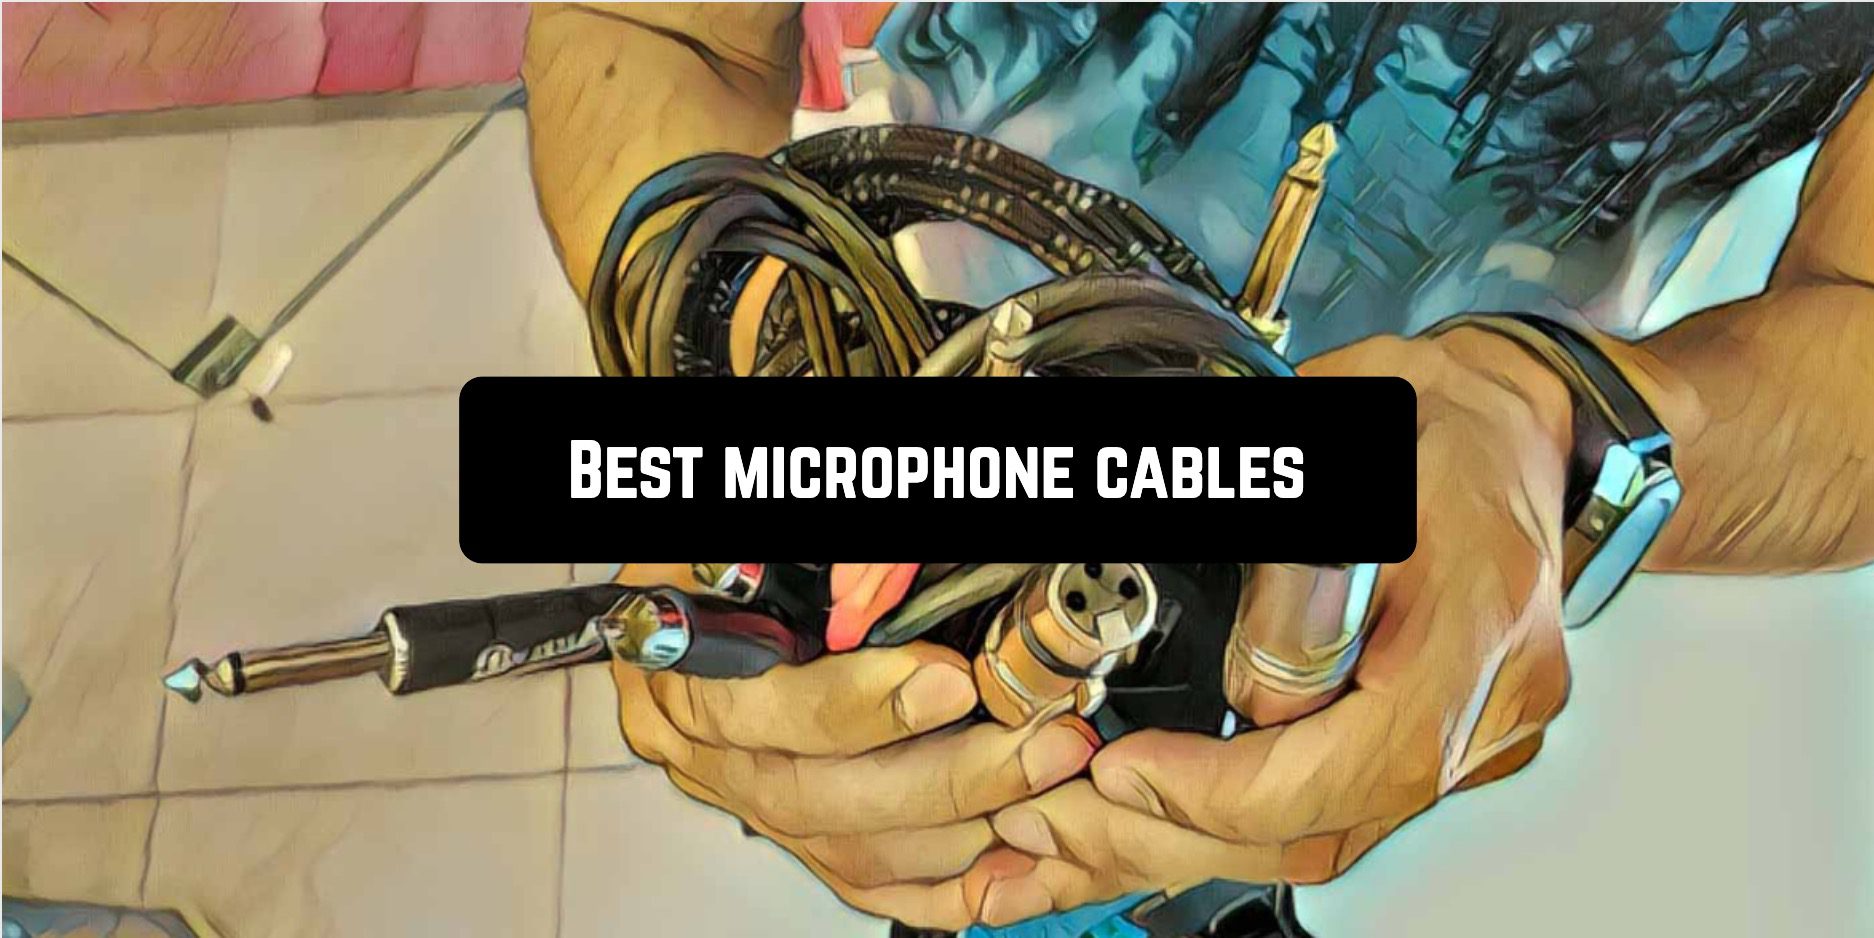 Best microphone cables